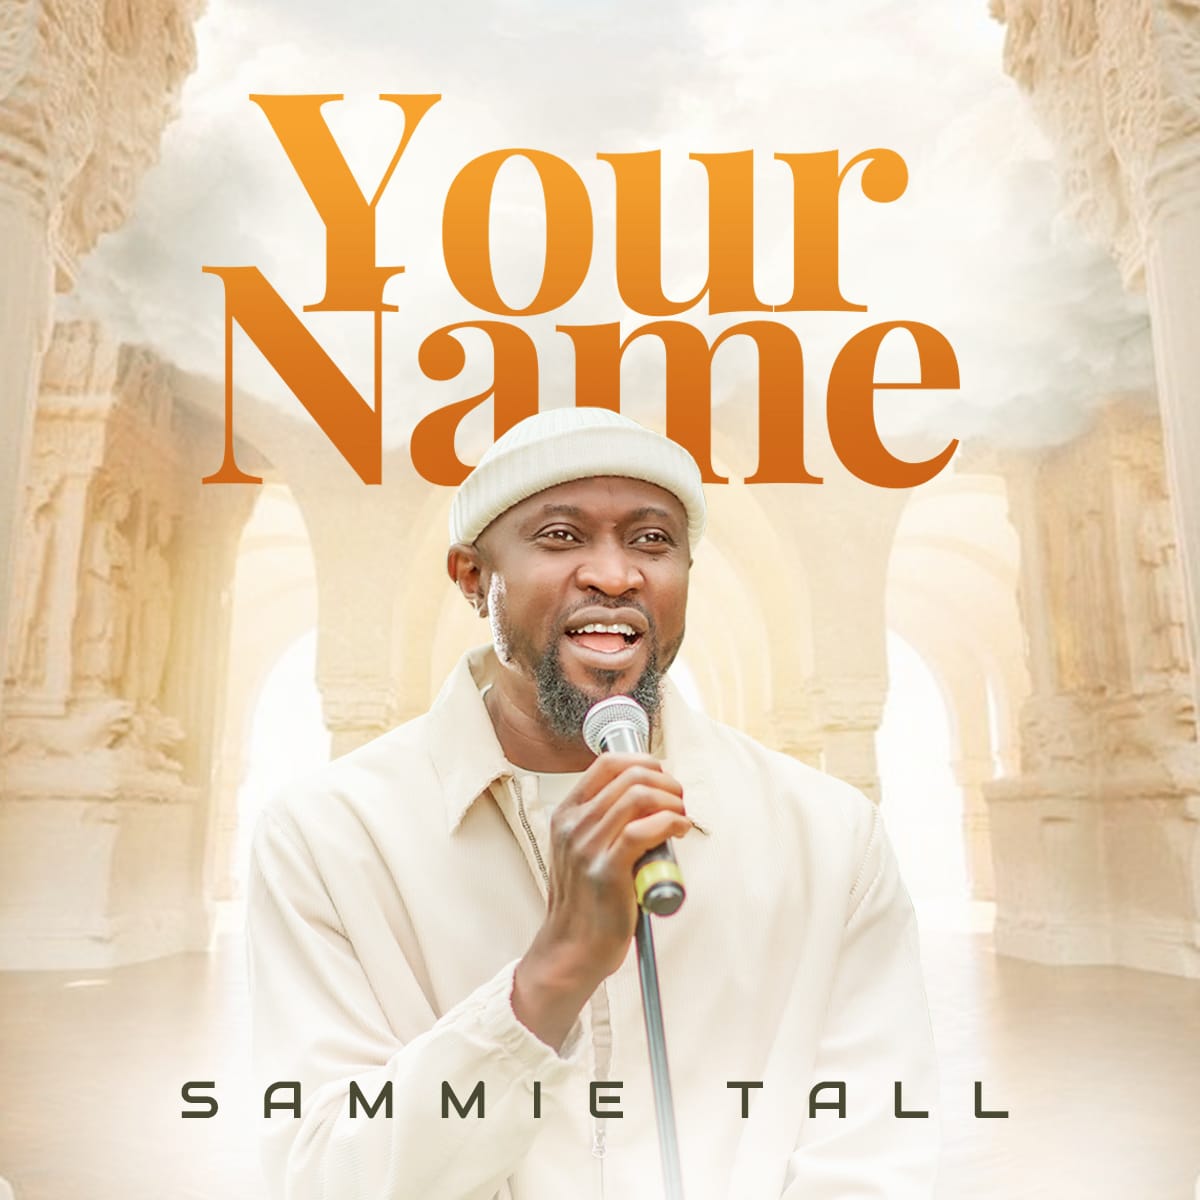 SAMMIE TALL RELEASES NEW SINGLE YOUR NAME